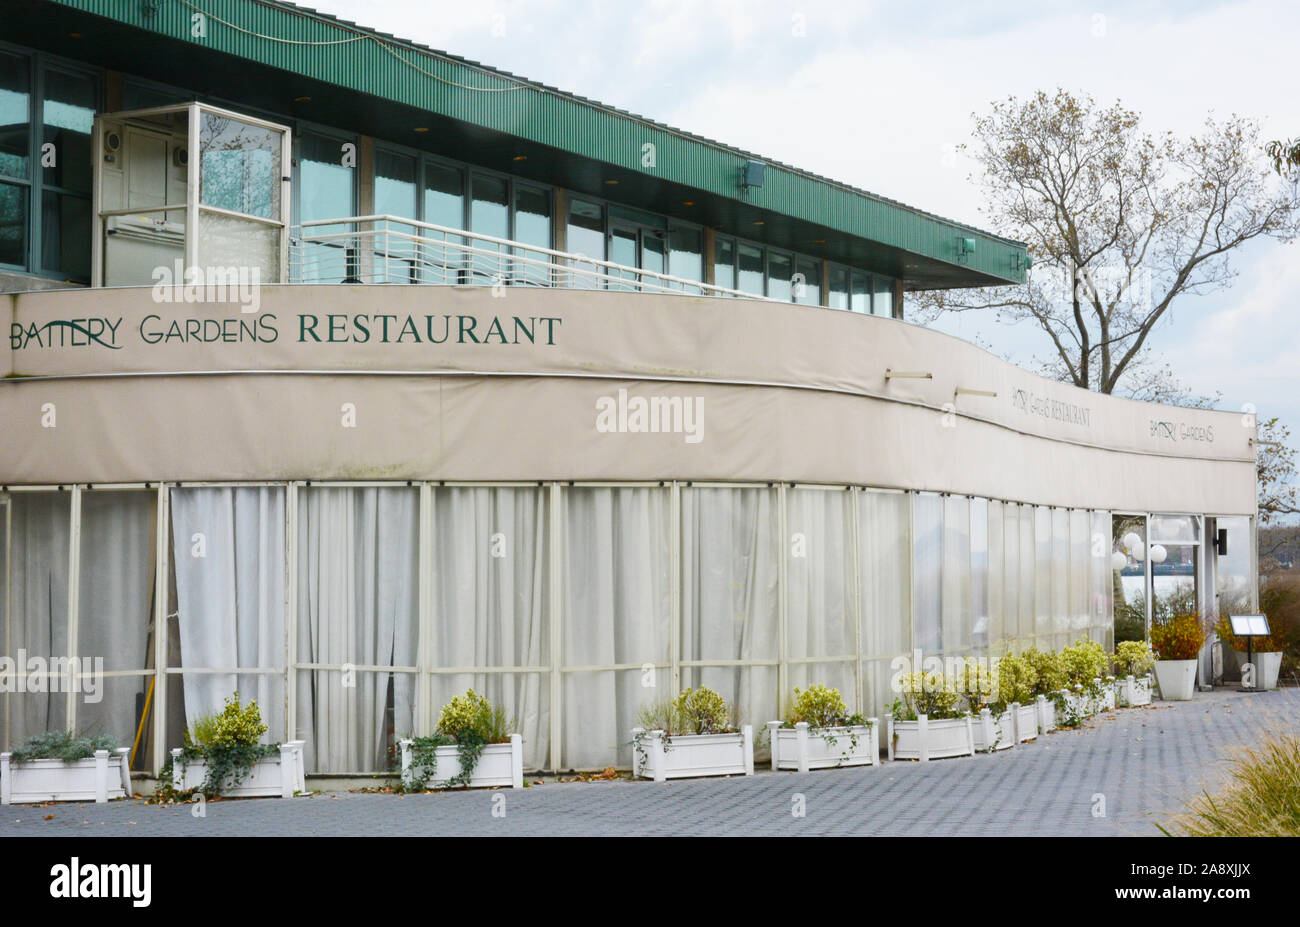 New York, NY - 05 NOV 2019: Battery Gardens Restaurant, a harborside restaurant featuring traditional American plates, a beer garden and patio bar, in Stock Photo